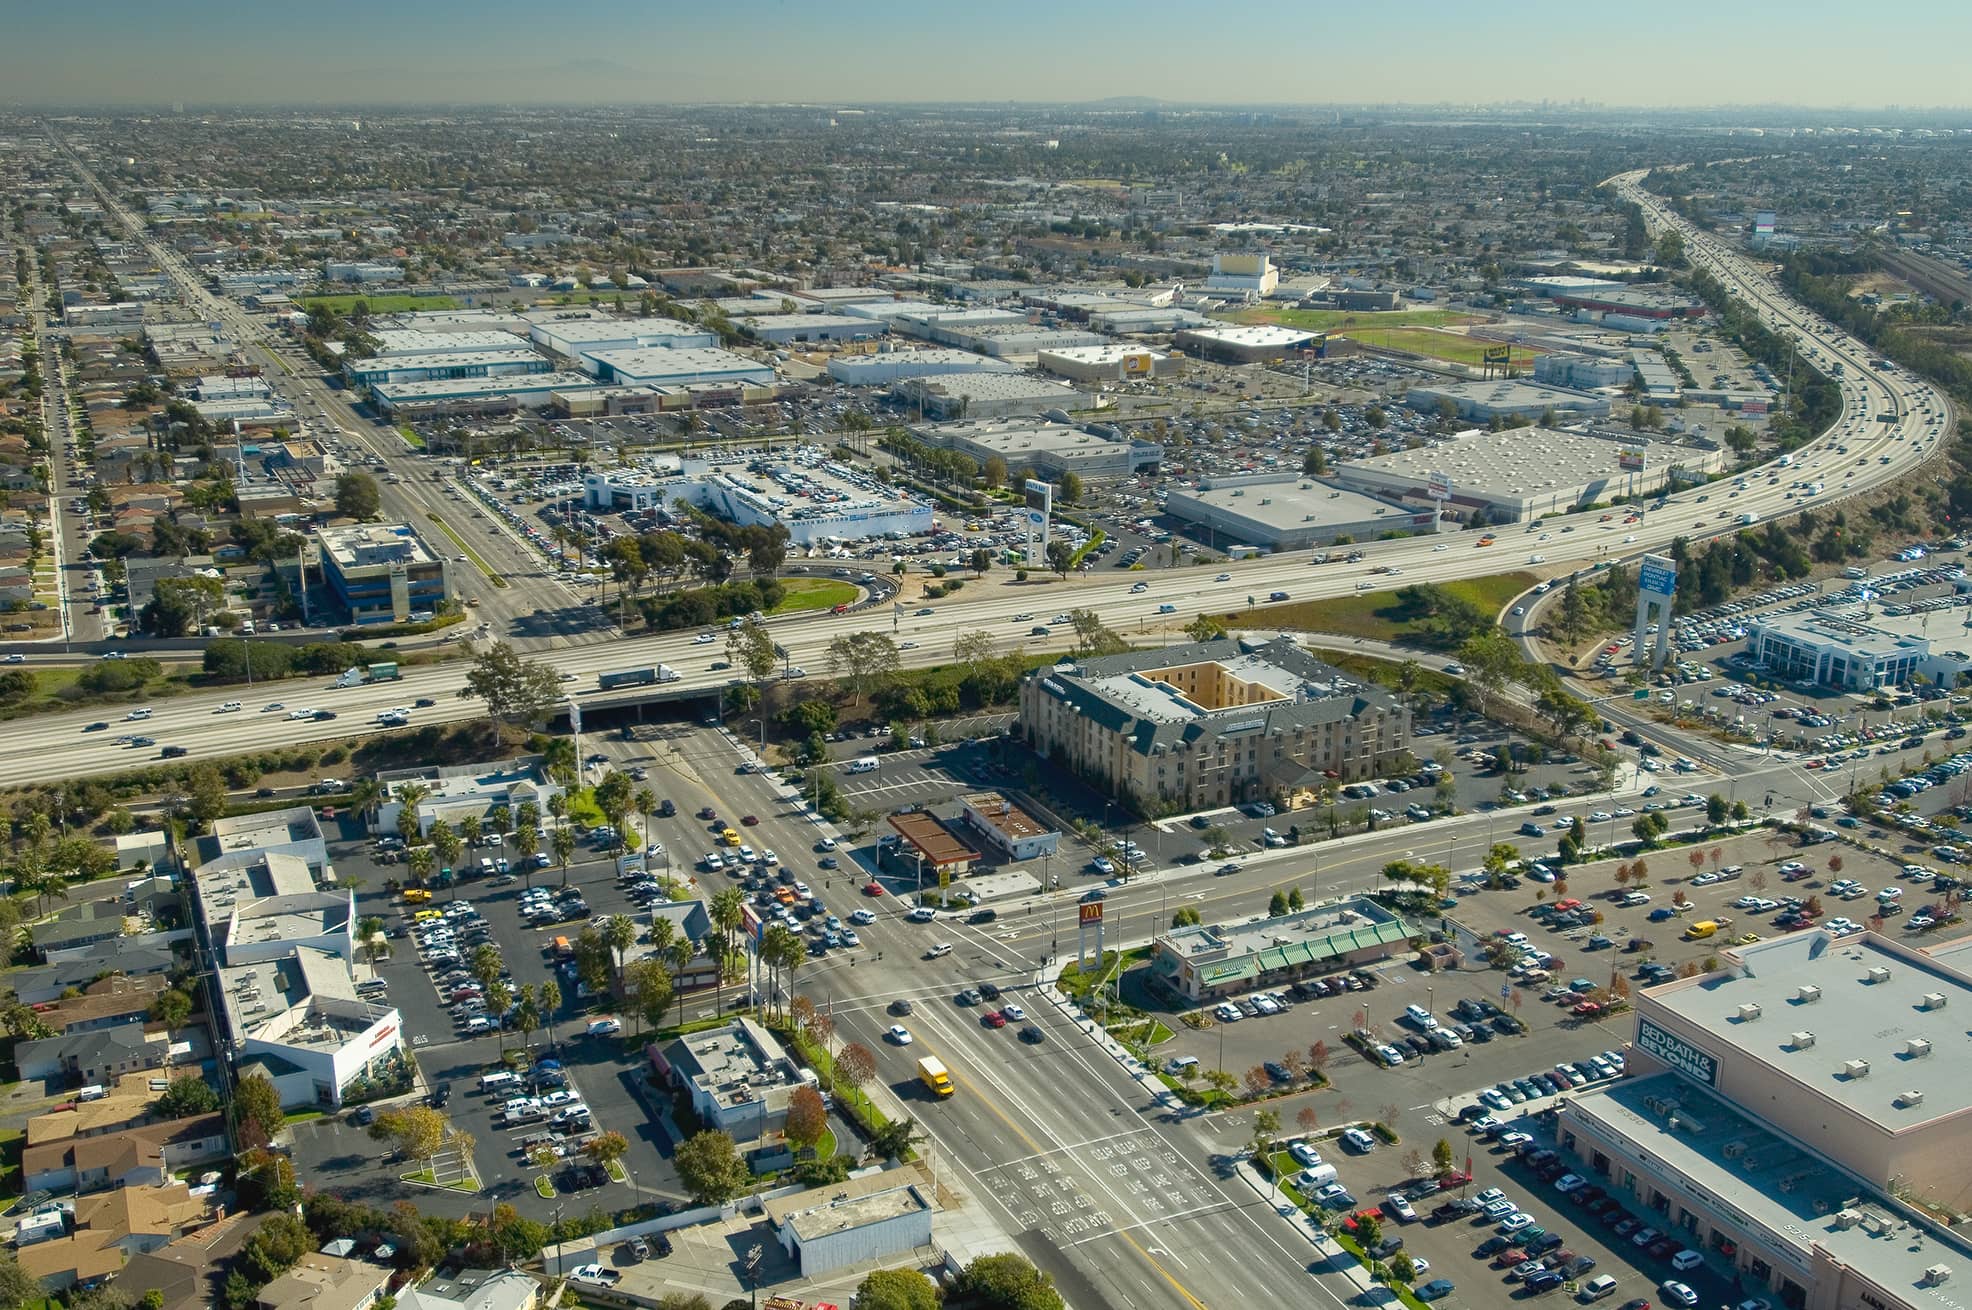 Kimley-Horn's technology consultants were tasked with expanding the KITS Advanced Traffic Management System throughout Los Angeles County, California.